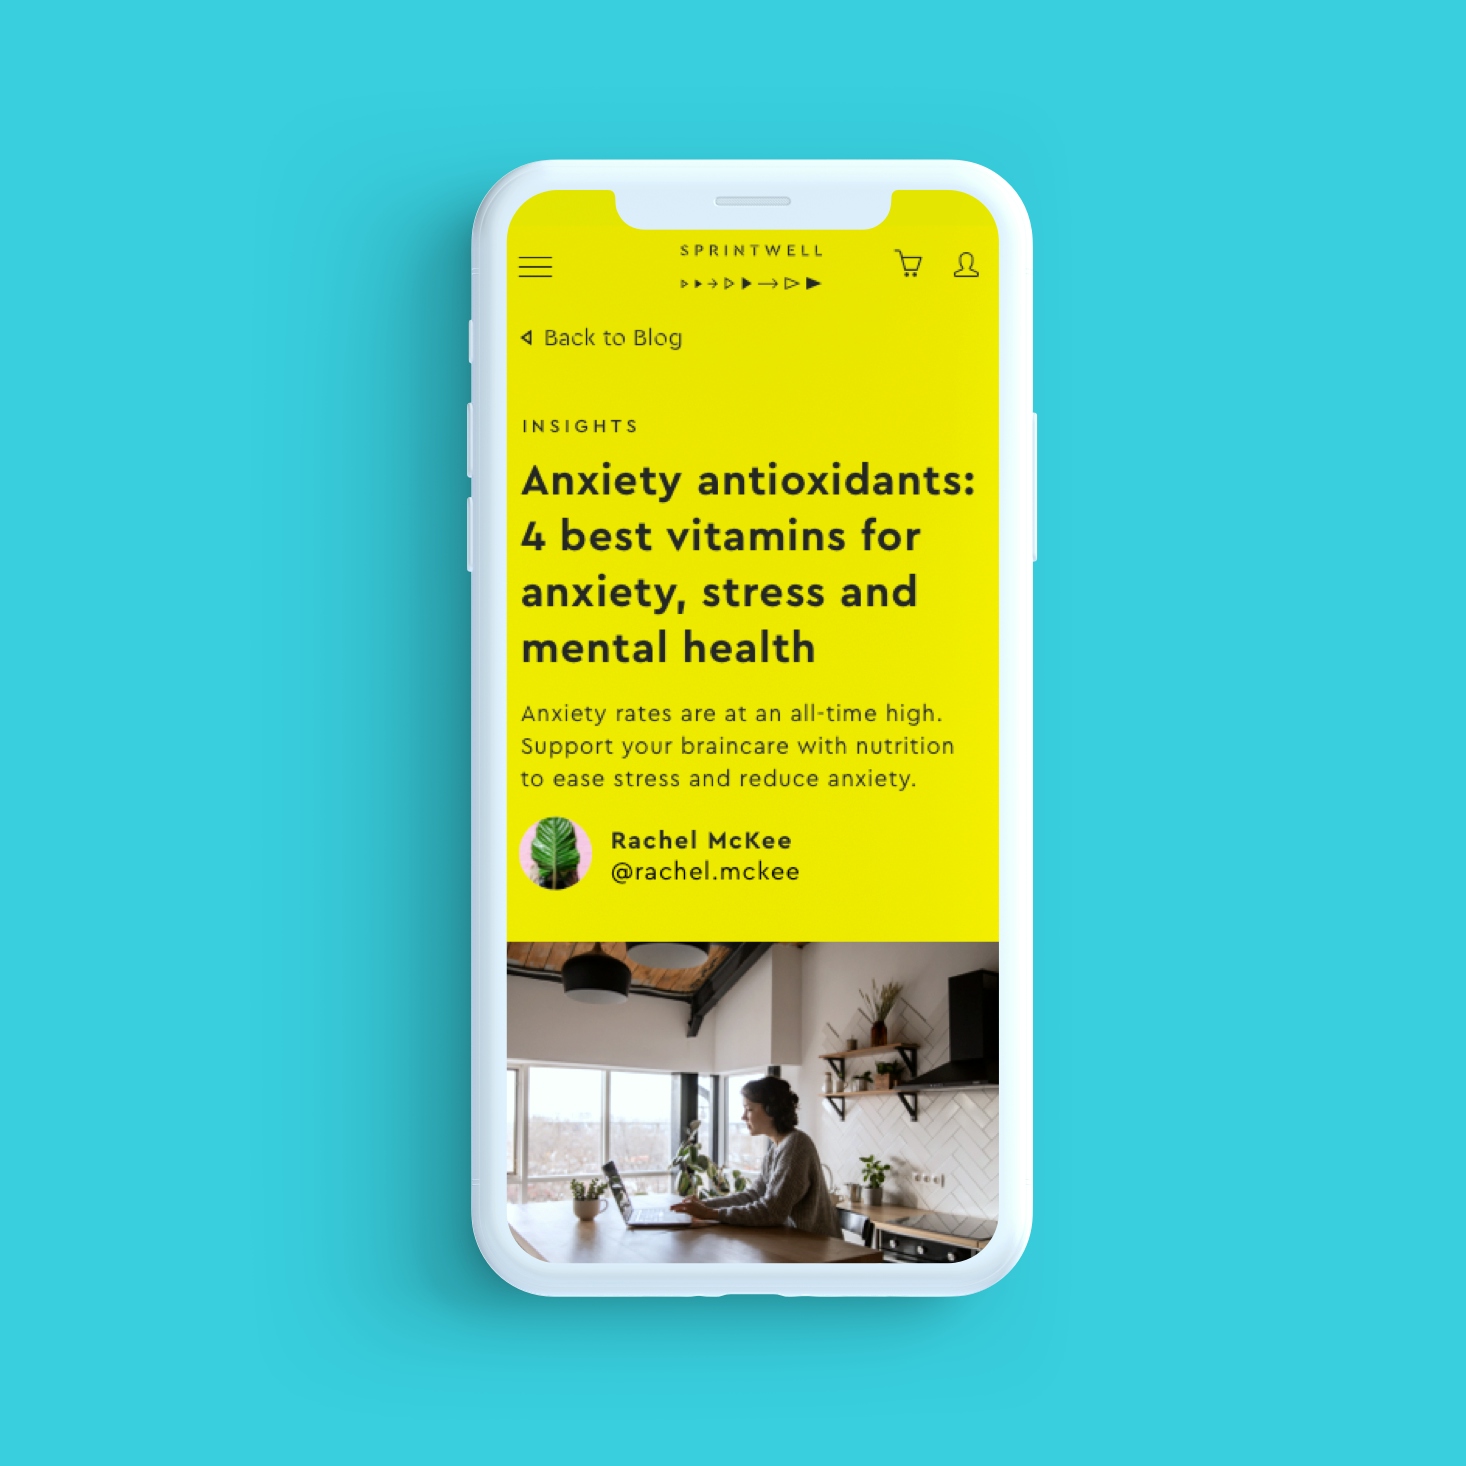 A white mobile phone sits on a teal background and shows a yellow webpage about “Anxiety antioxidants: 4 best vitamins for anxiety, stress and mental health”. There is illustrative text and a picture of a woman on a laptop sitting in a kitchen is at the bottom of the page.